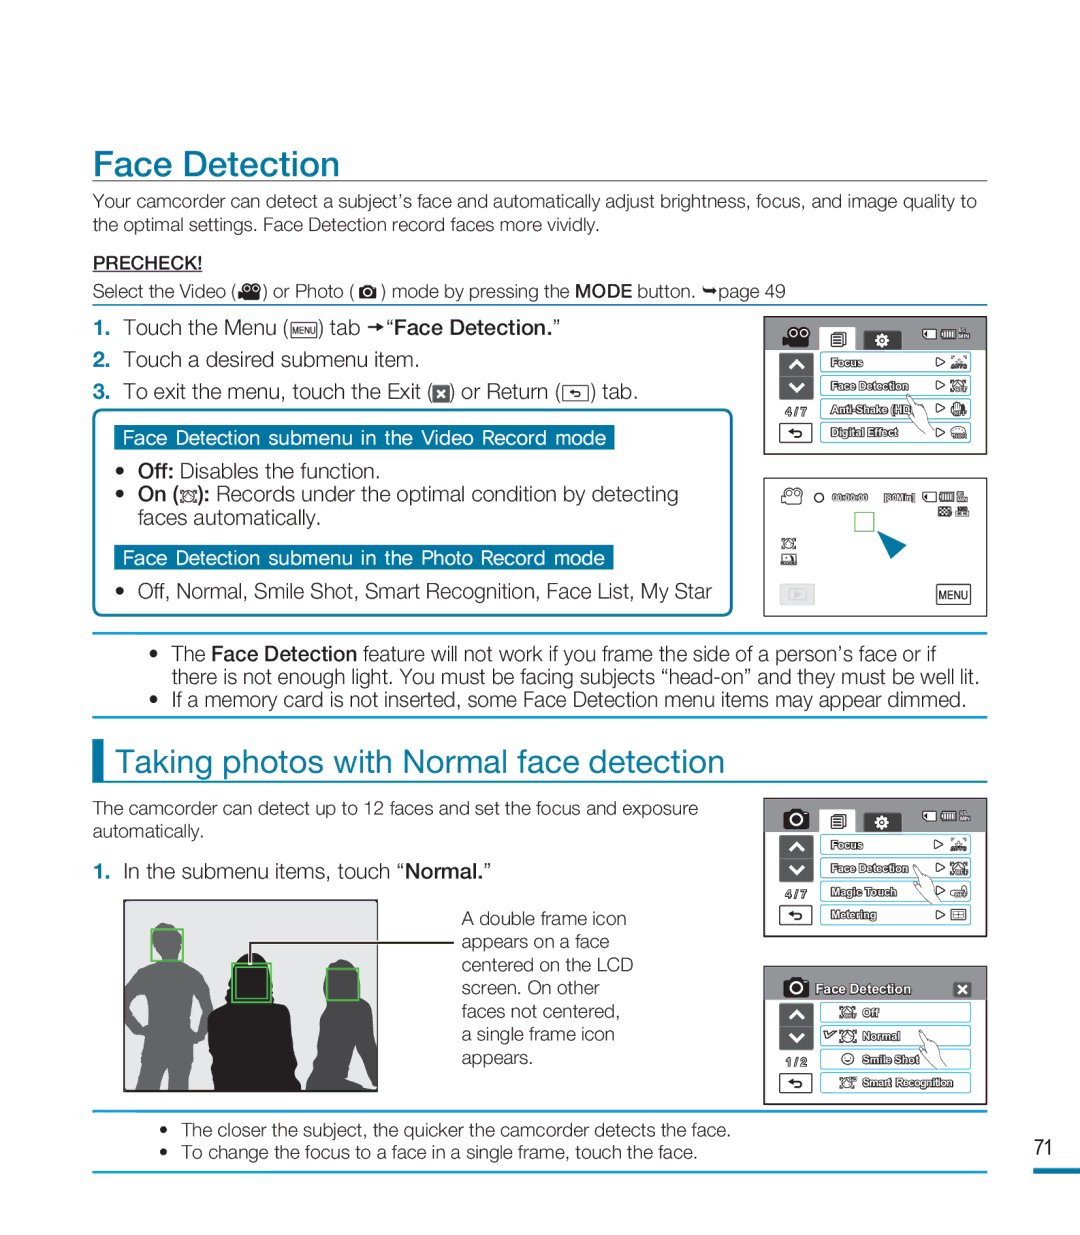 Samsung HMX-M20BN, HMX-M20N Face Detection, Taking photos with Normal face detection, Submenu items, touch Normal 